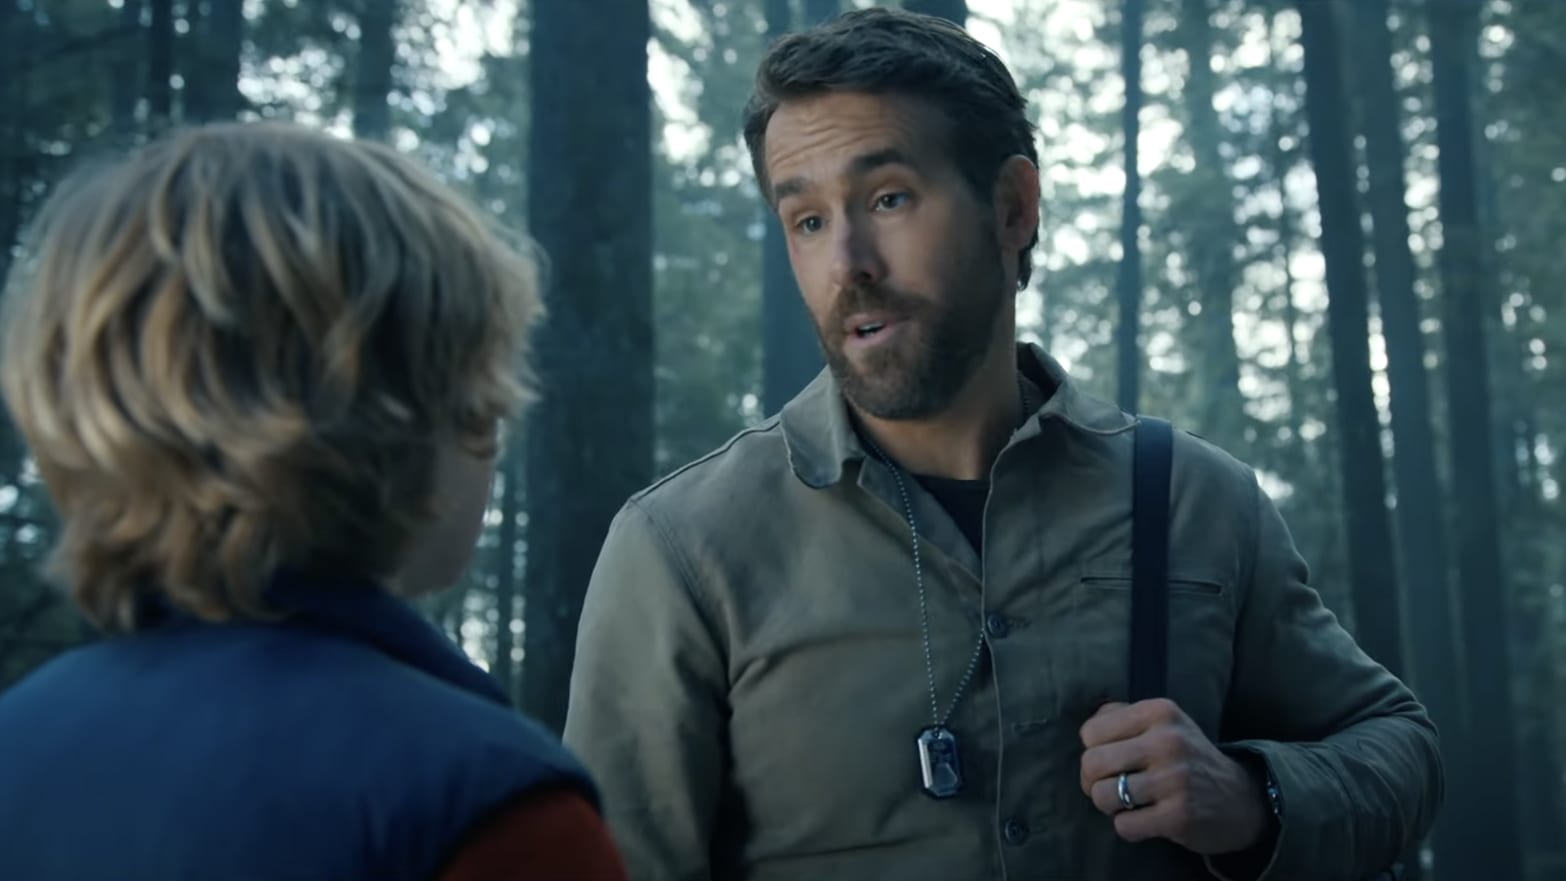 Ryan Reynolds Time-Travels To Meet His Younger Self In Netflix's